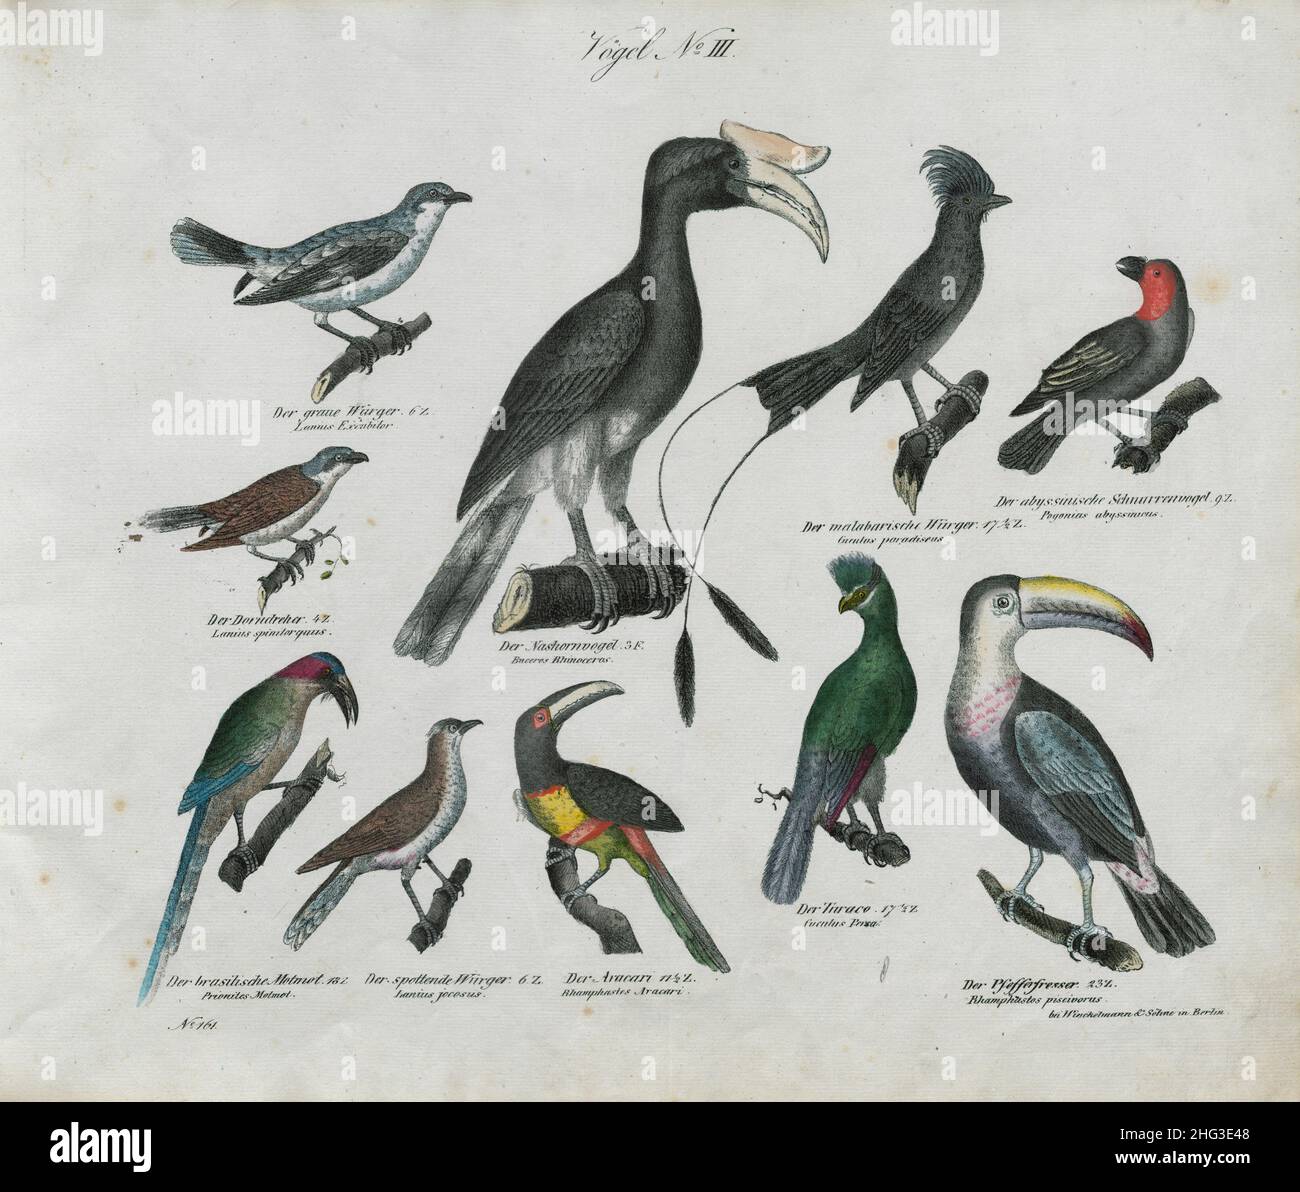 Vintage drawings of birds. No. III. Germany, 1836 (by Linnaeus classification, 1758) Top row from left to right: The grey shrike; the hornbill; the Ma Stock Photo